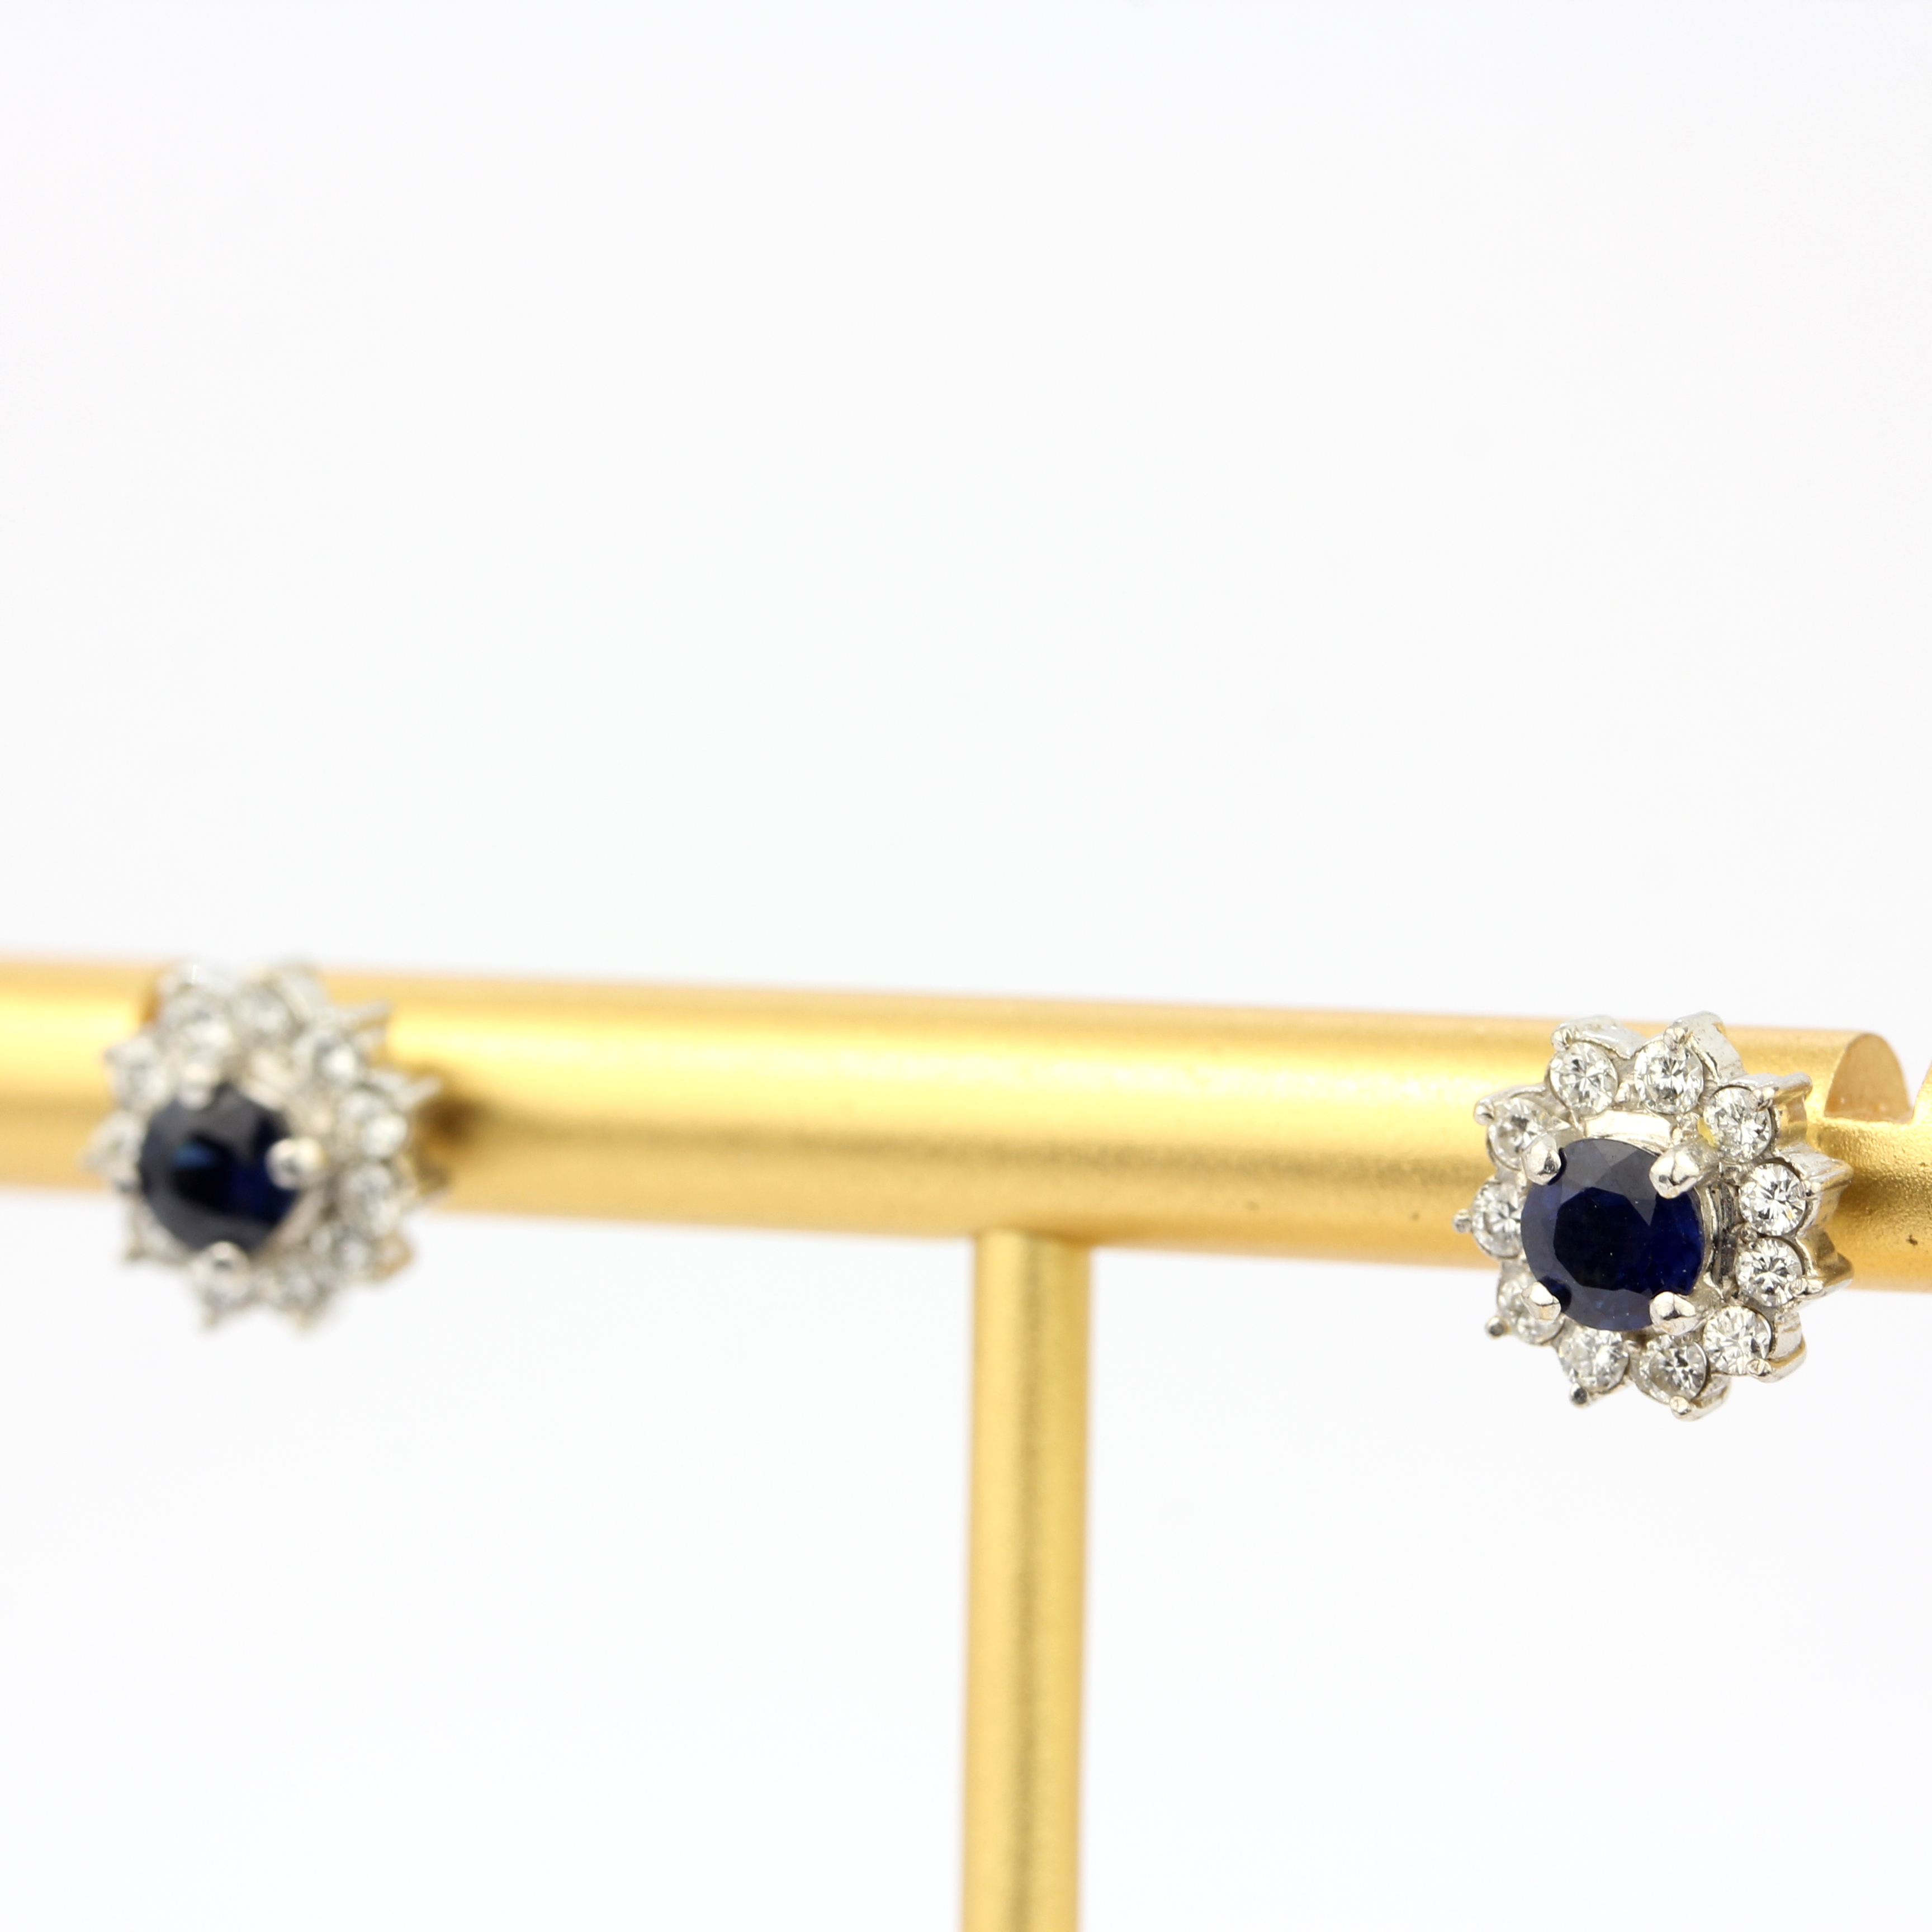 A pair of 18ct white gold cluster earrings set with sapphires and brilliant cut diamonds, Dia. 1cm. - Image 3 of 3